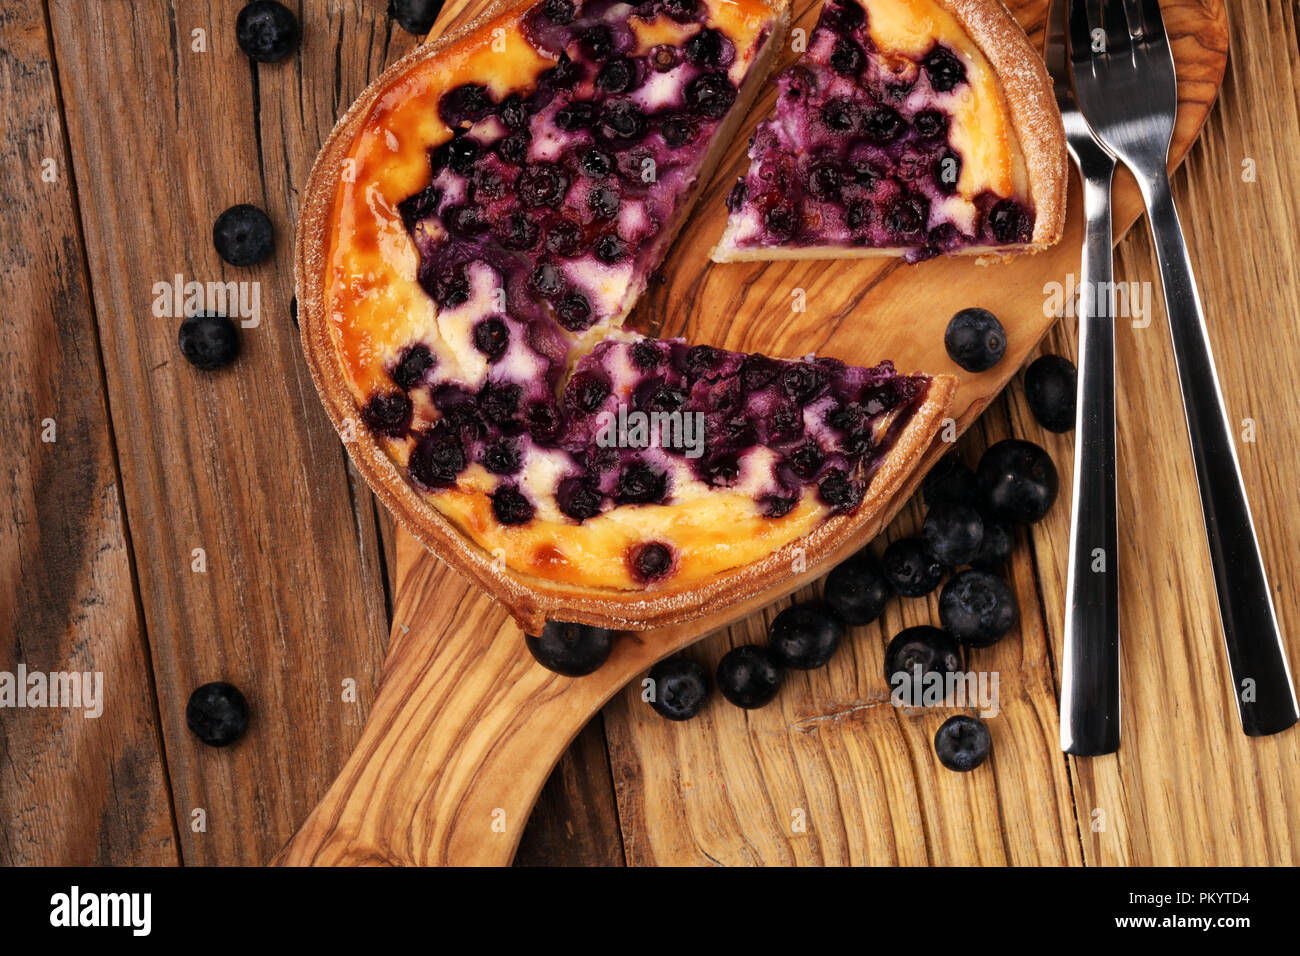 Blueberry pie or homemade cheesecake with blueberries. Delicous dessert blueberry tart. Stock Photo